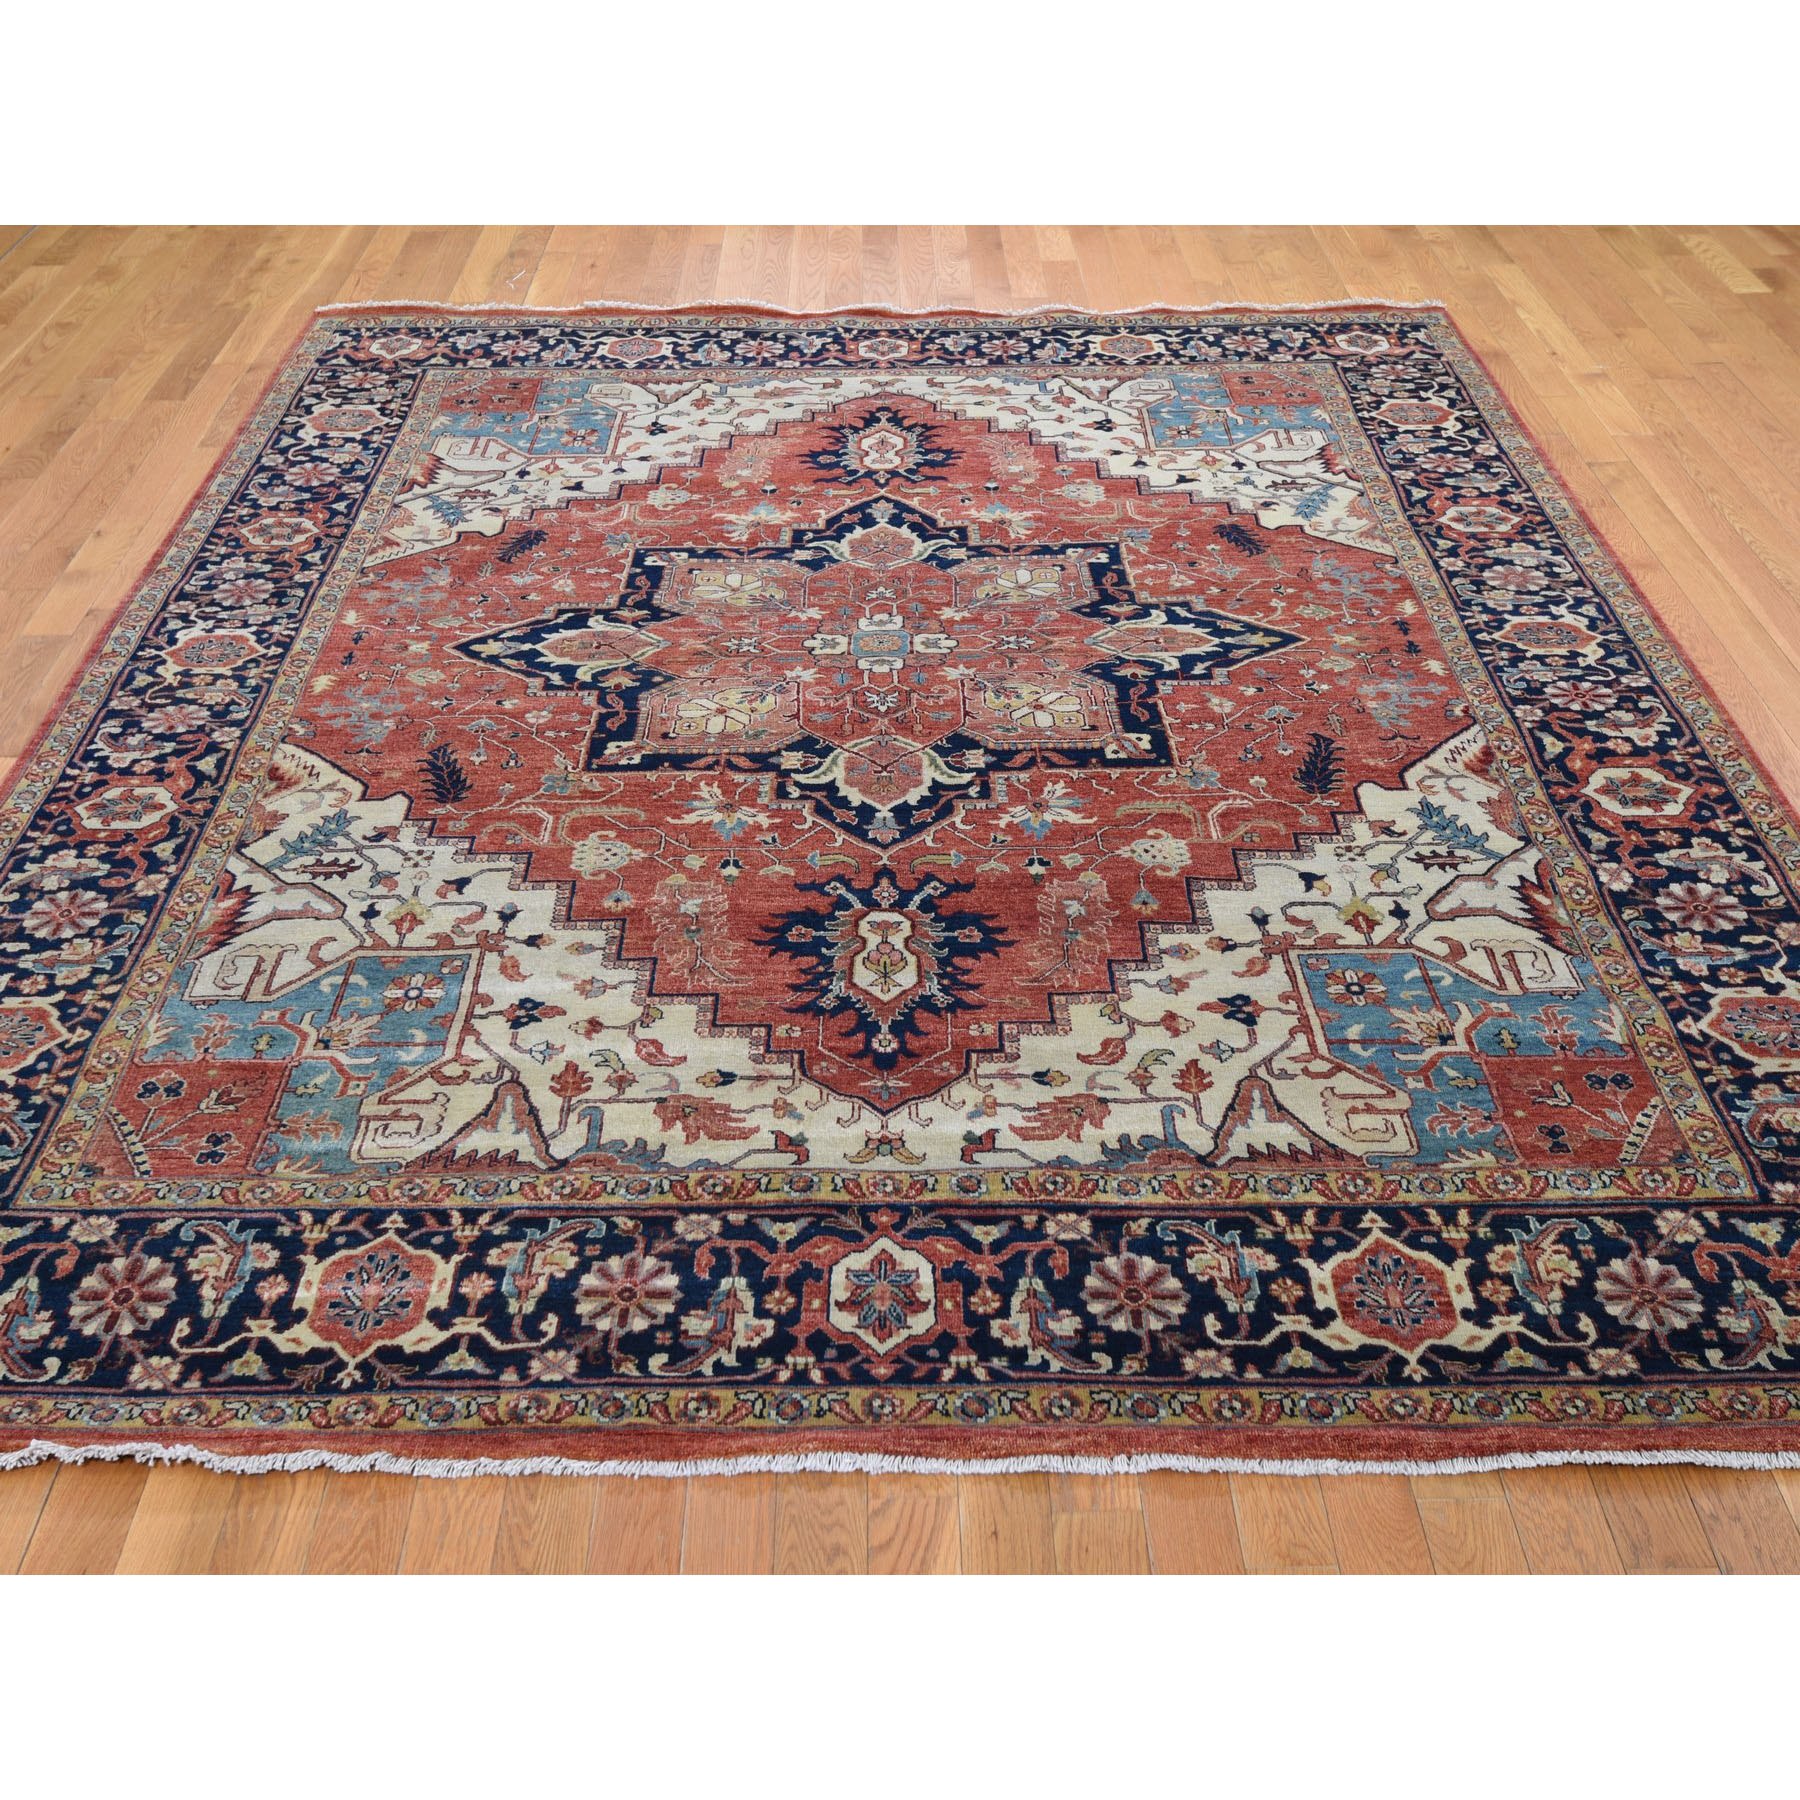 8-1 x10-3  Antiqued Heriz Re-Creation Hand Knotted Pure Wool Oriental Rug 